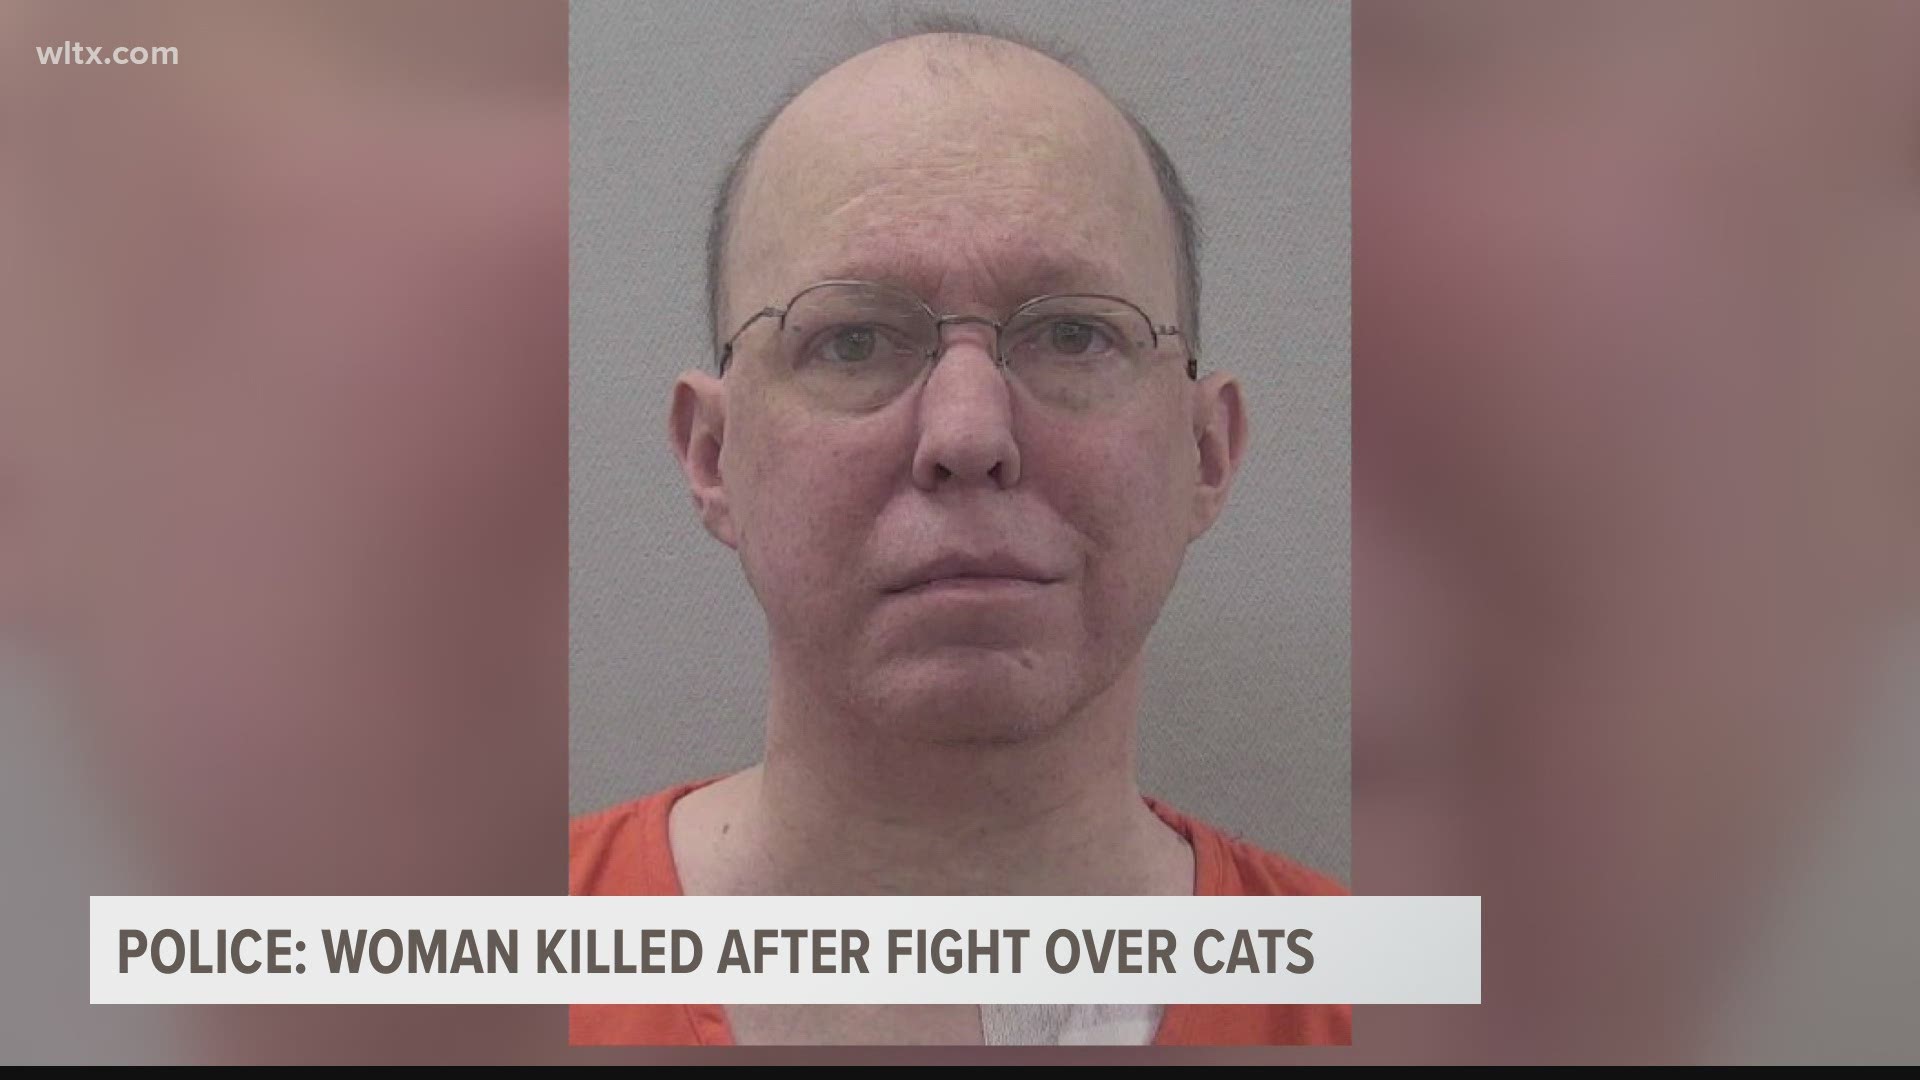 A South Carolina man is facing a murder charge after police say he killed a woman he was arguing with over stray cats.